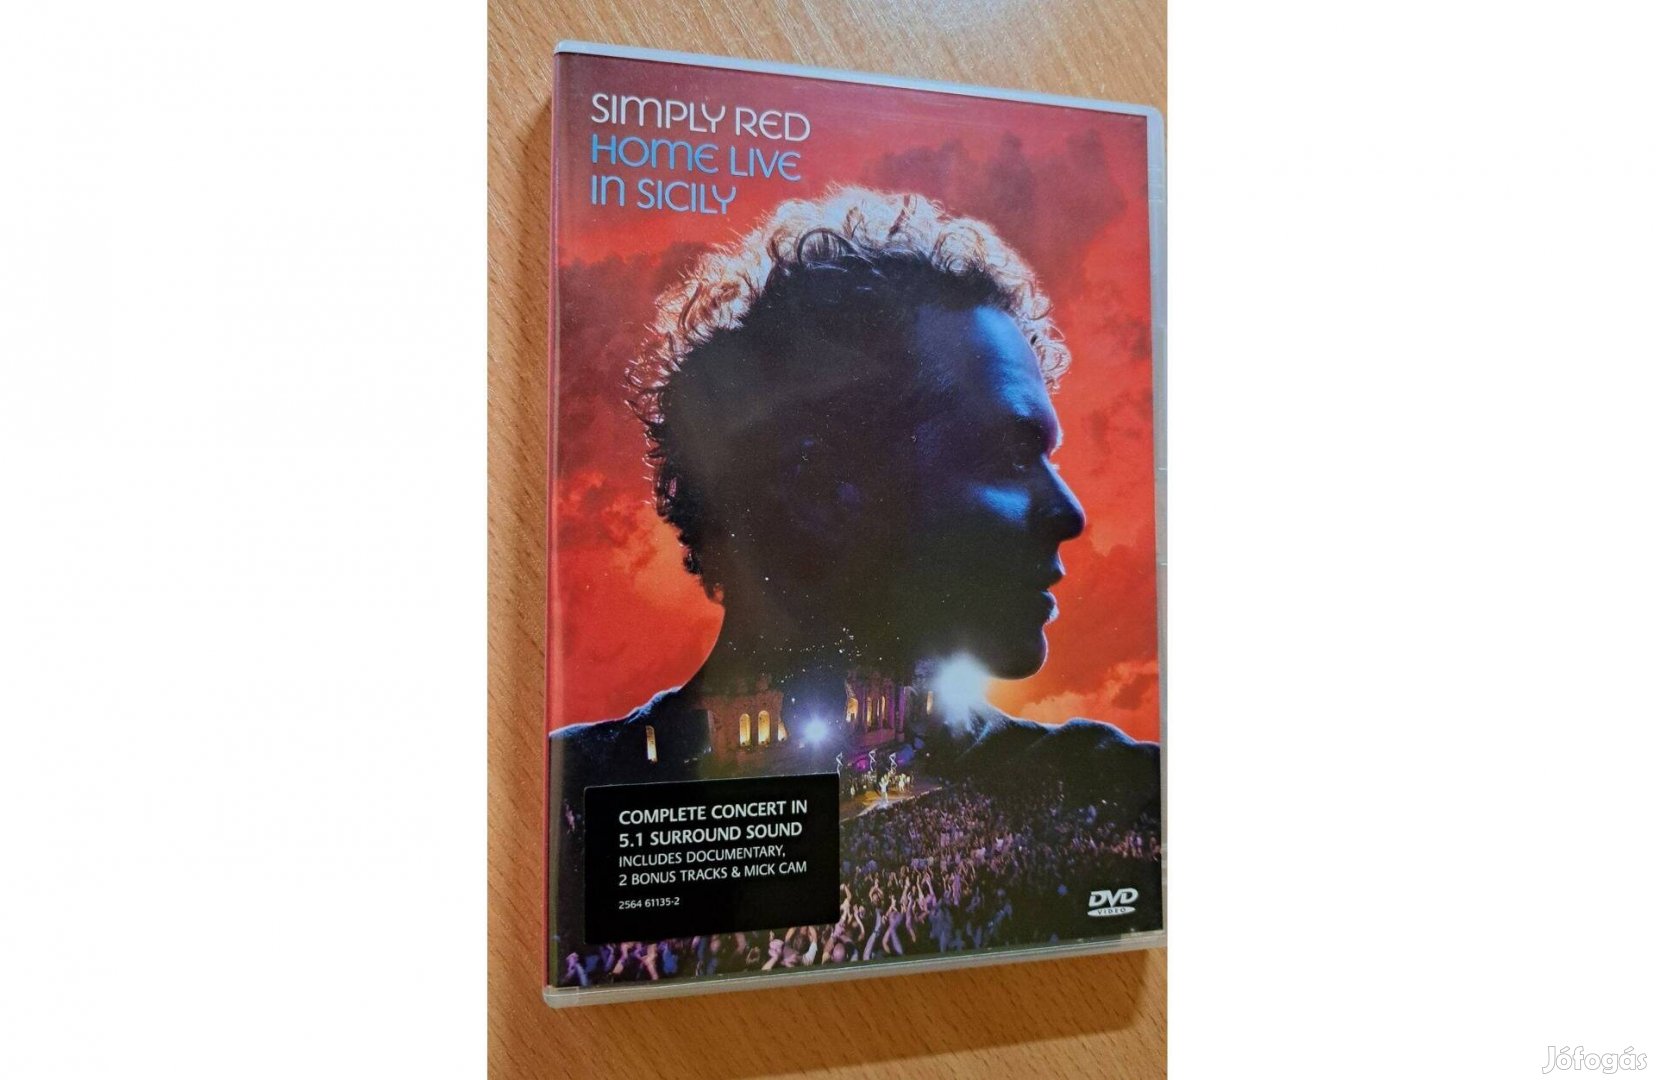 Simply Red - Home Live in Sicily - DVD